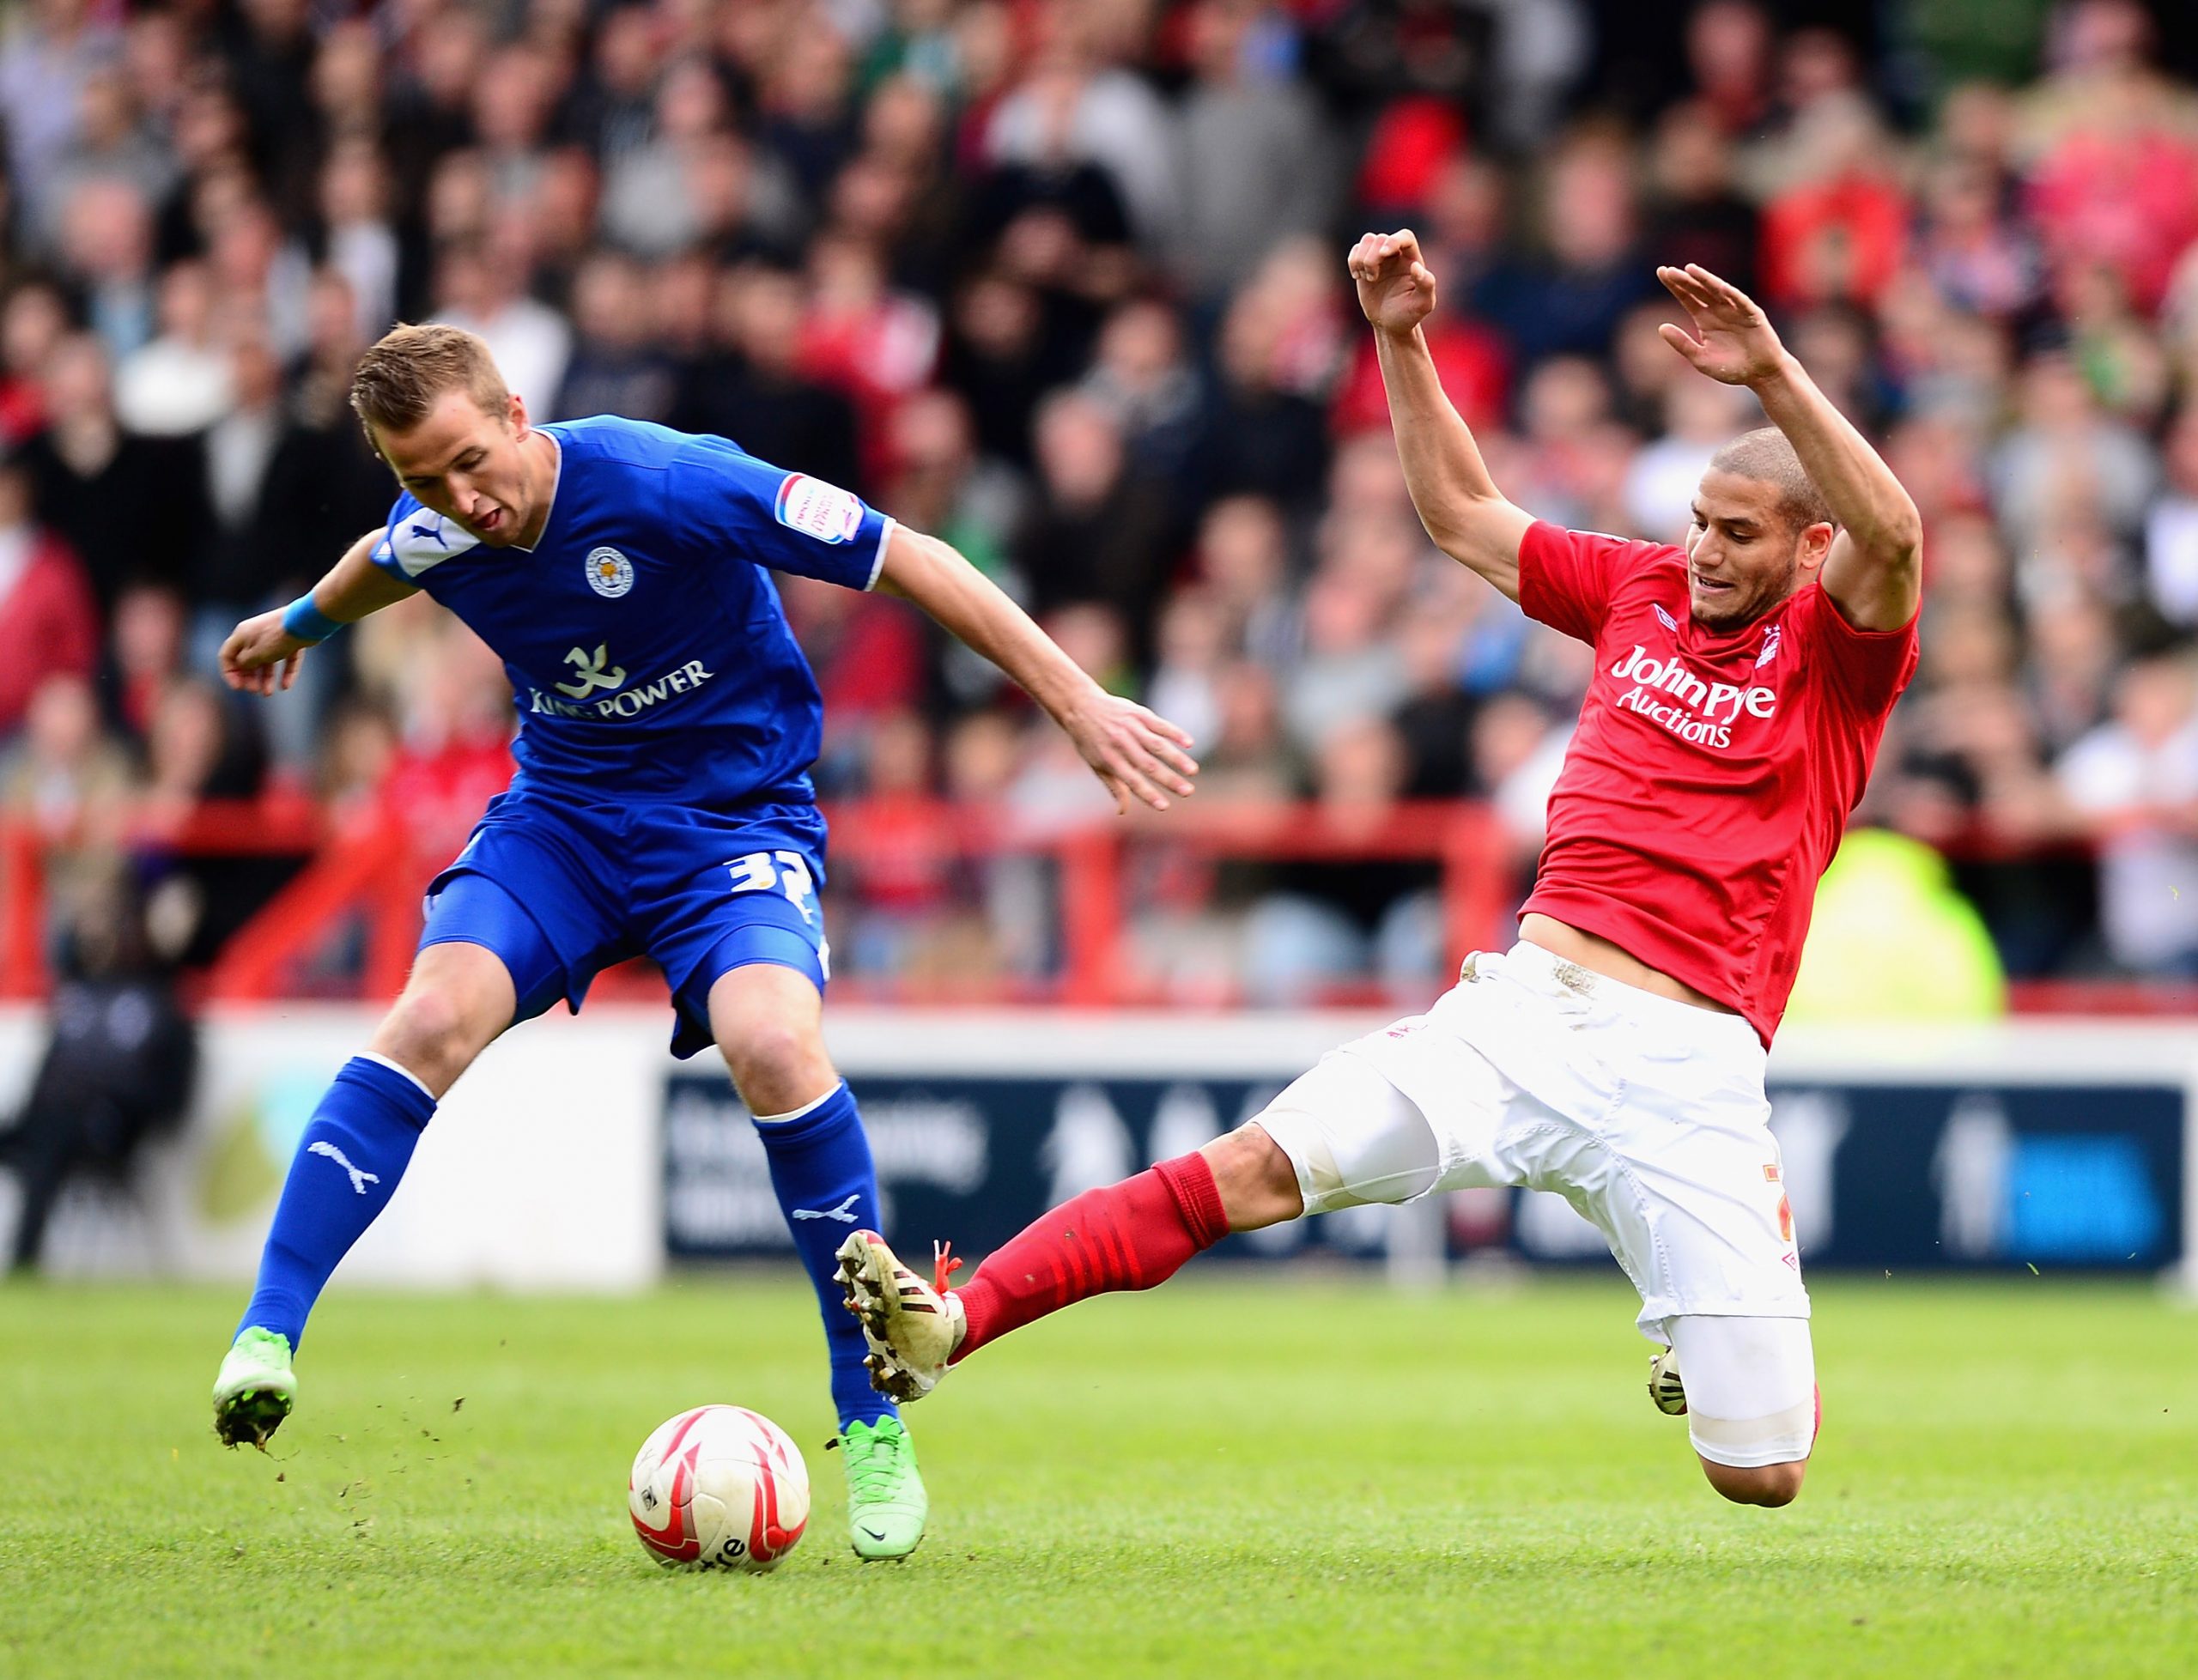 Harry Kane of Leicester City battles with Adlene Guedioura of Nottingham Forest in the Championship - May 2013.